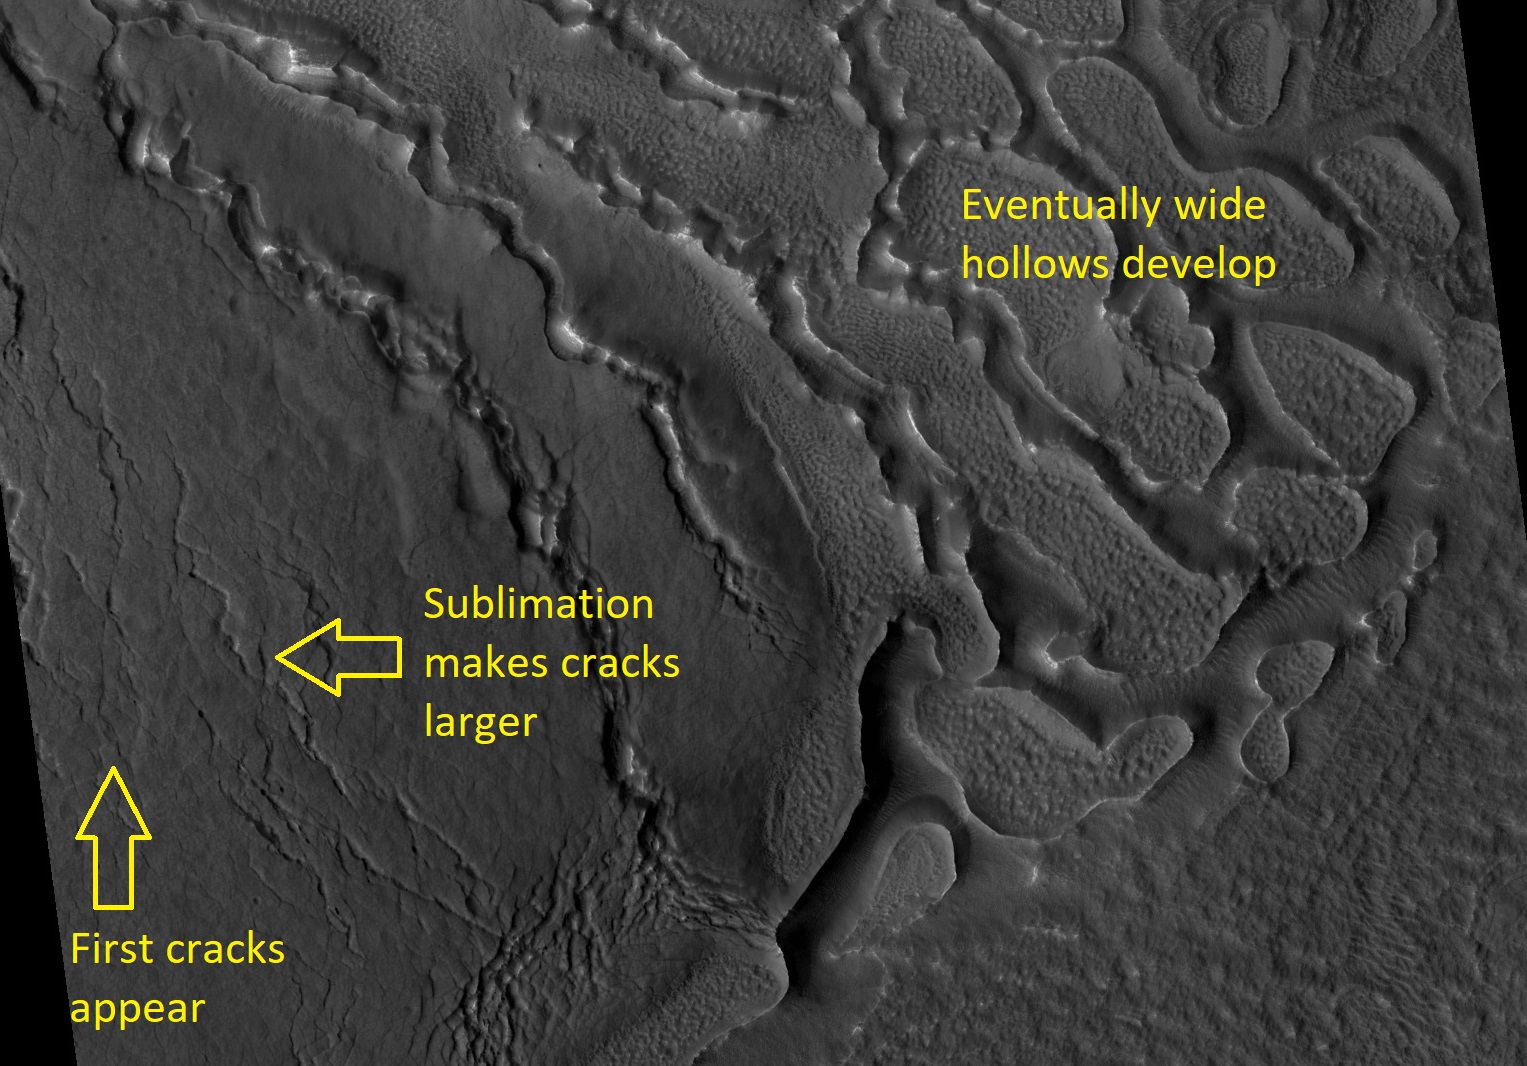 Ribbed terrain begins with cracks that eventually widen to produce hollows